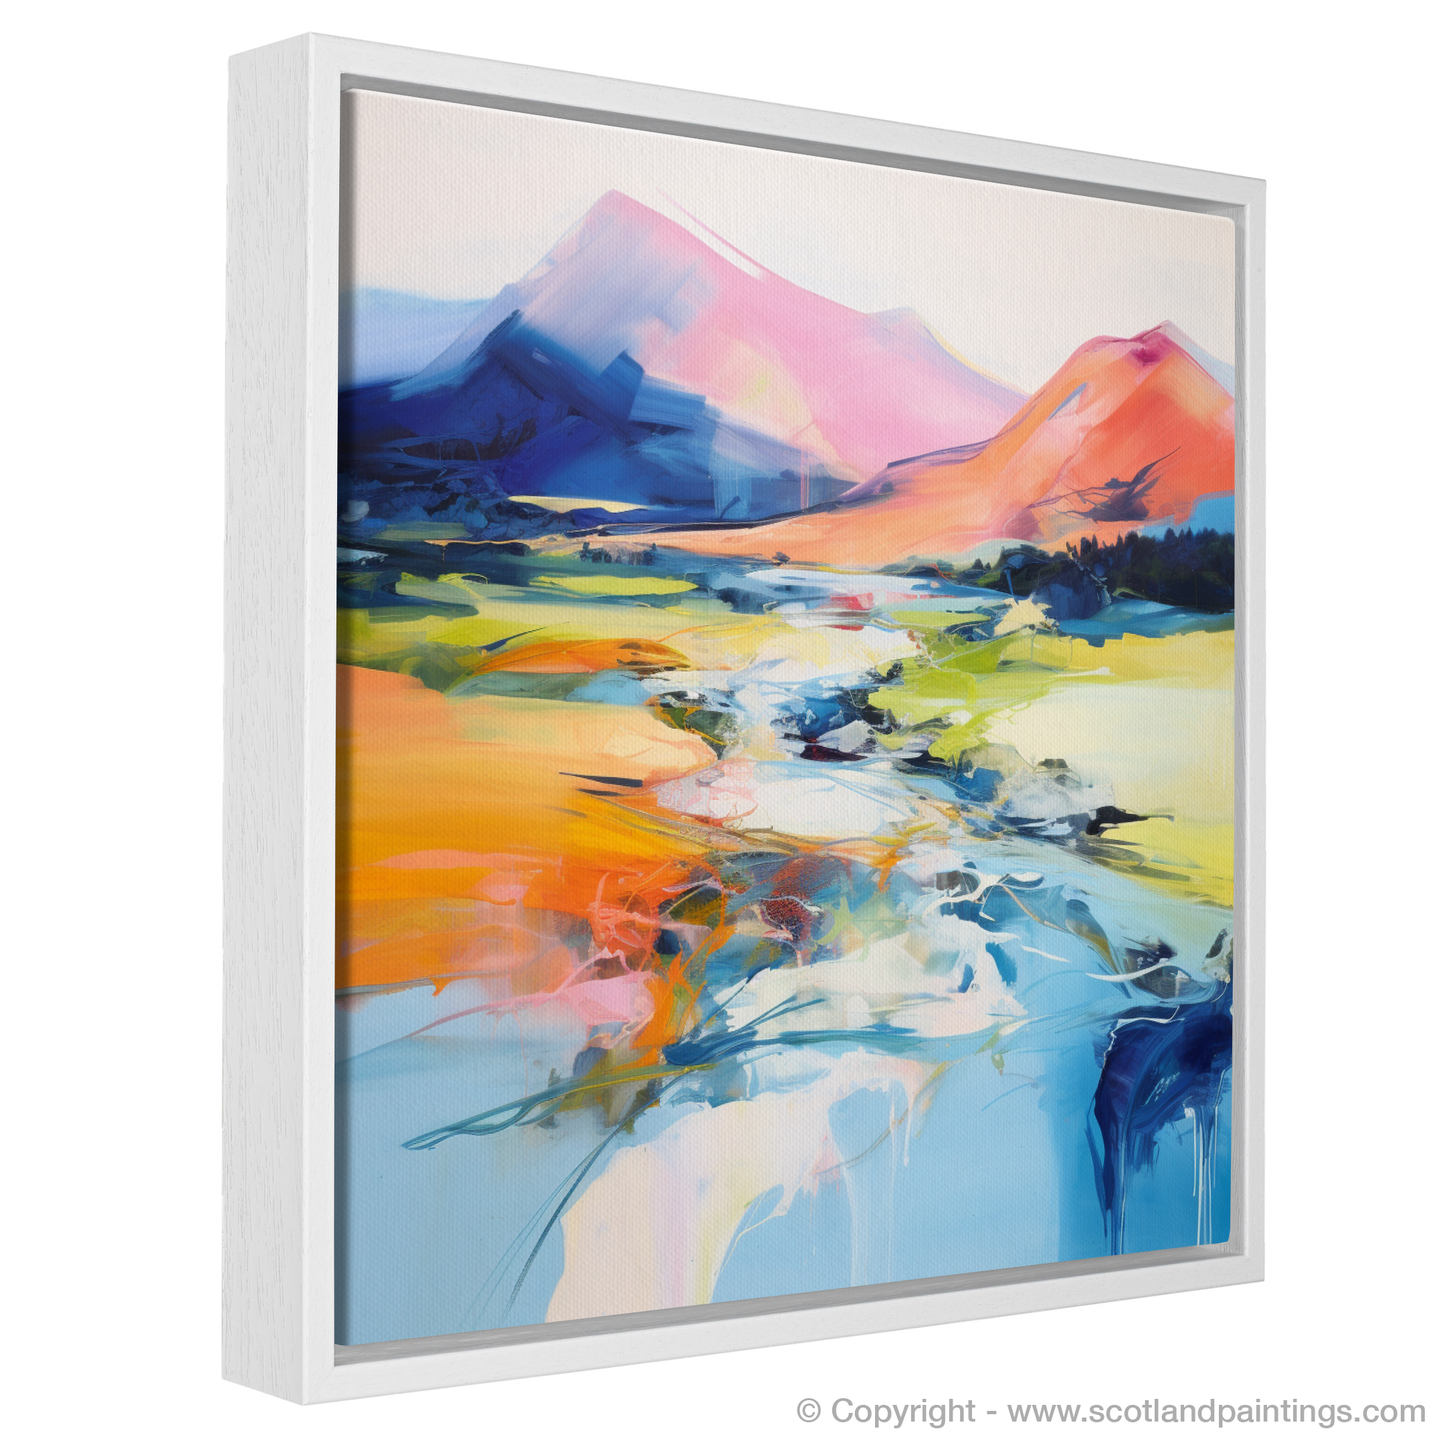 Painting and Art Print of River Spean, Highlands in summer entitled "Summer Blaze on the River Spean".